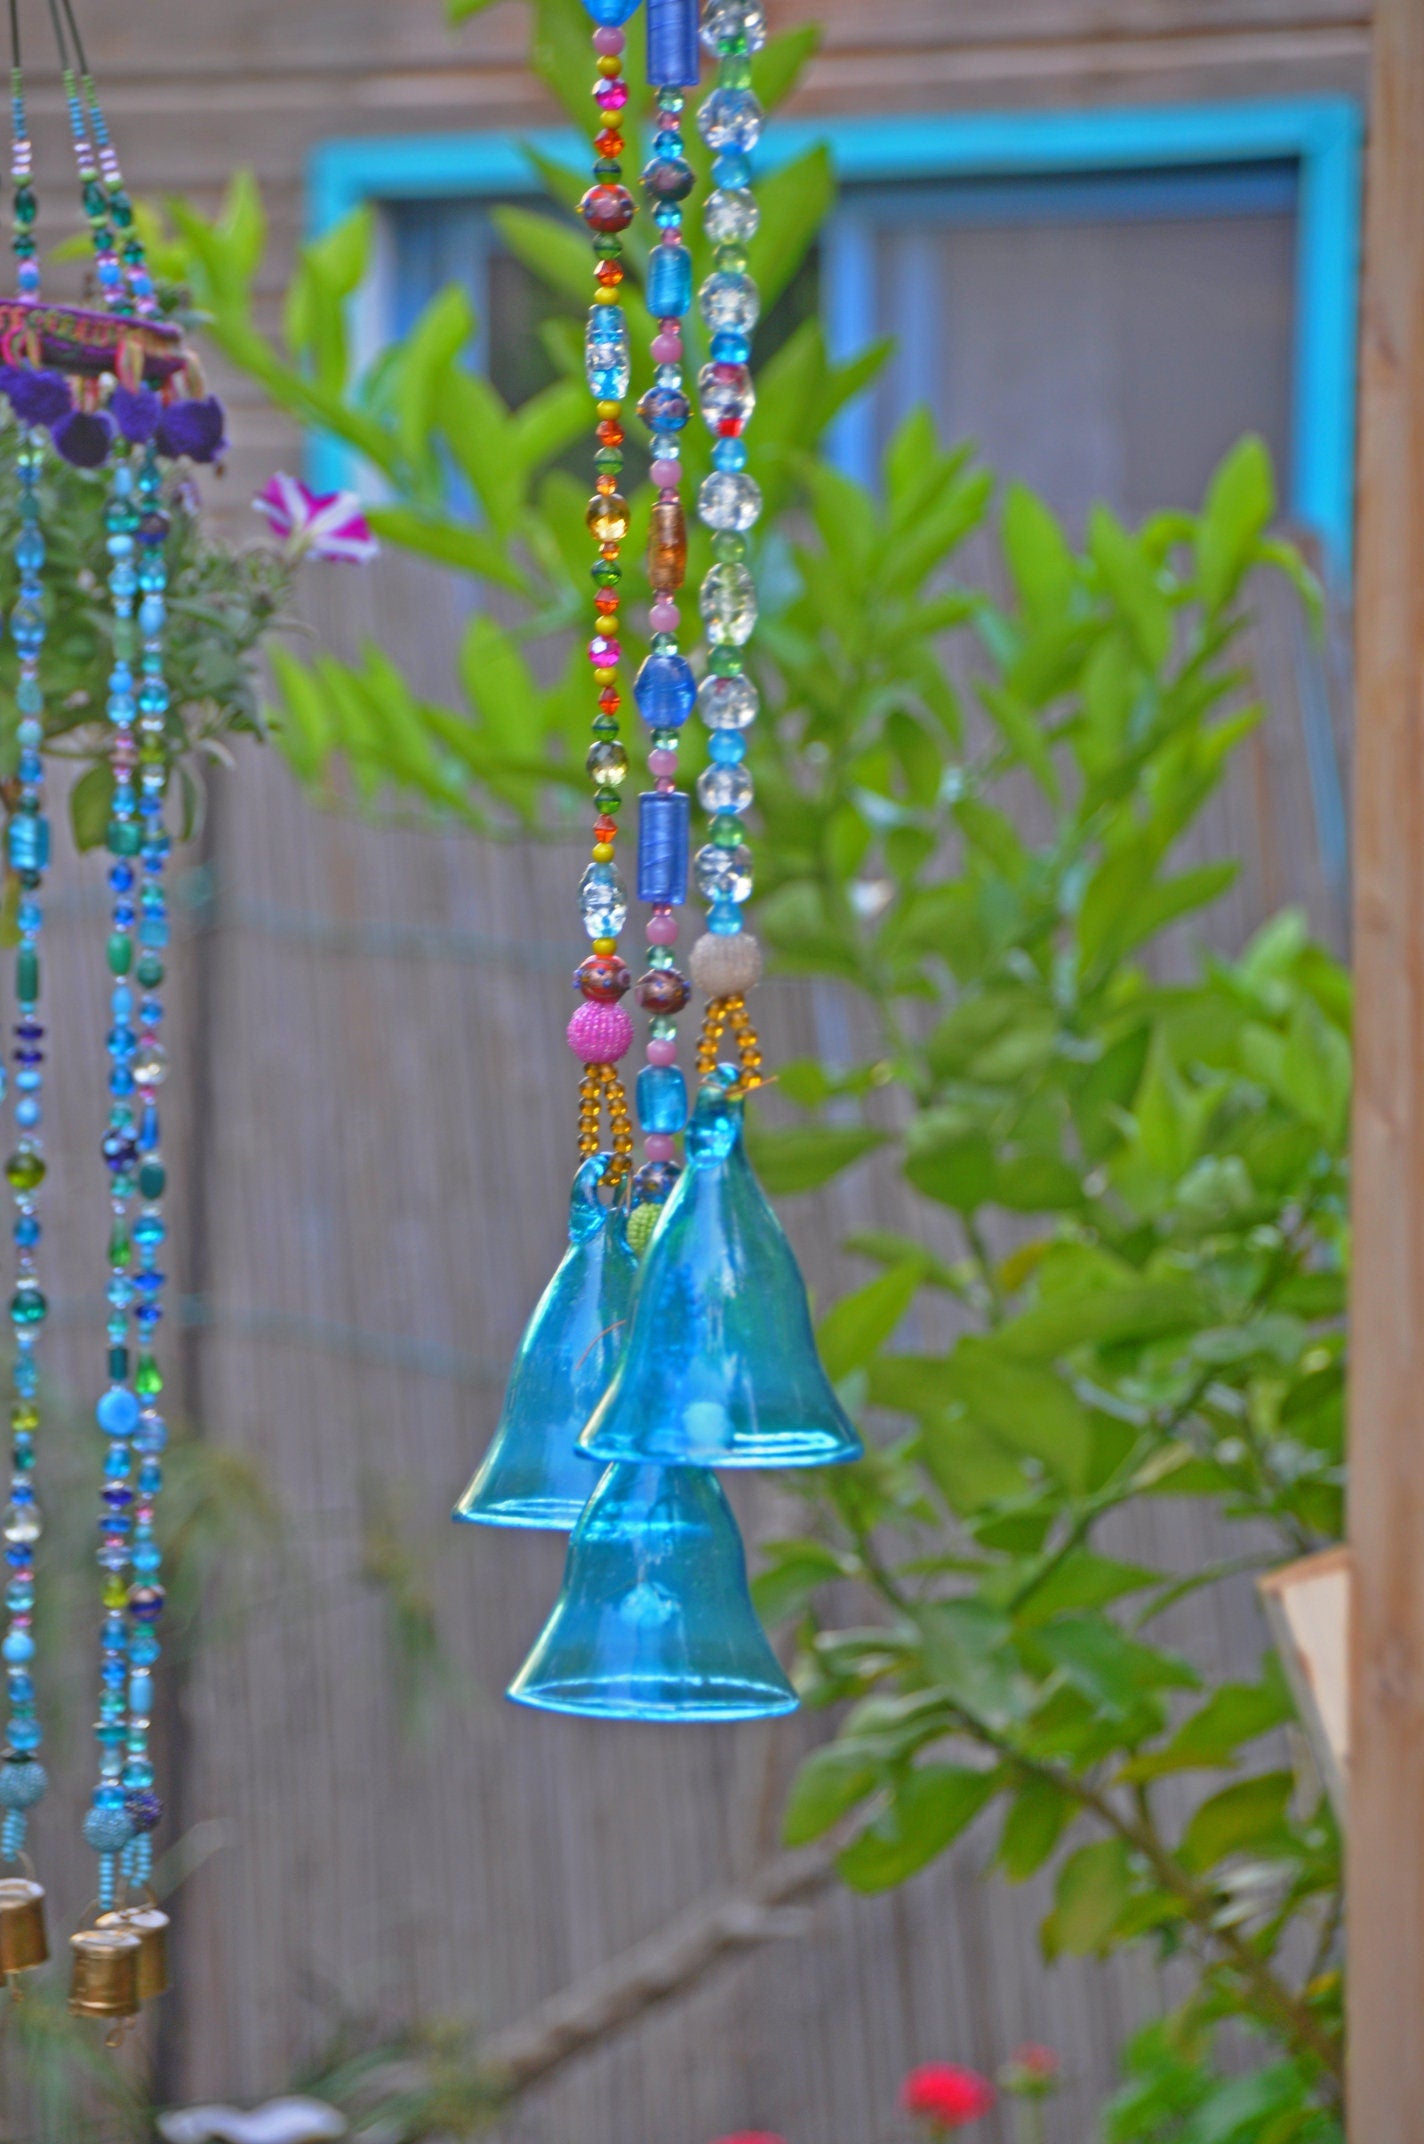 Three Turquoise glass Blown bells on a Beaded strings